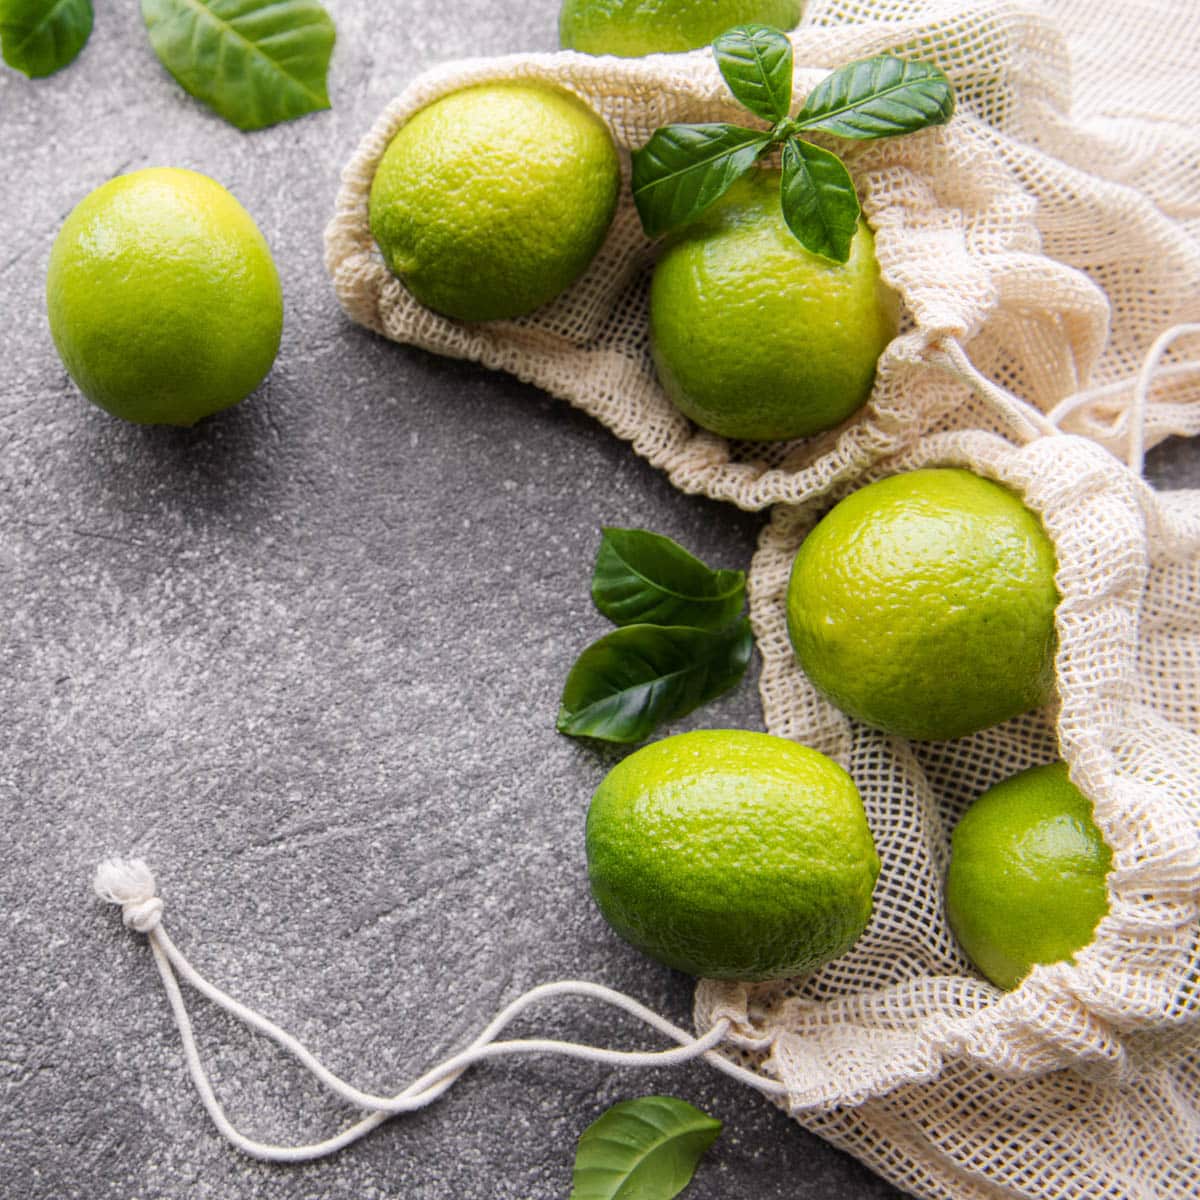 Ripe limes spilling out of a mesh produce bag on a grey counter.